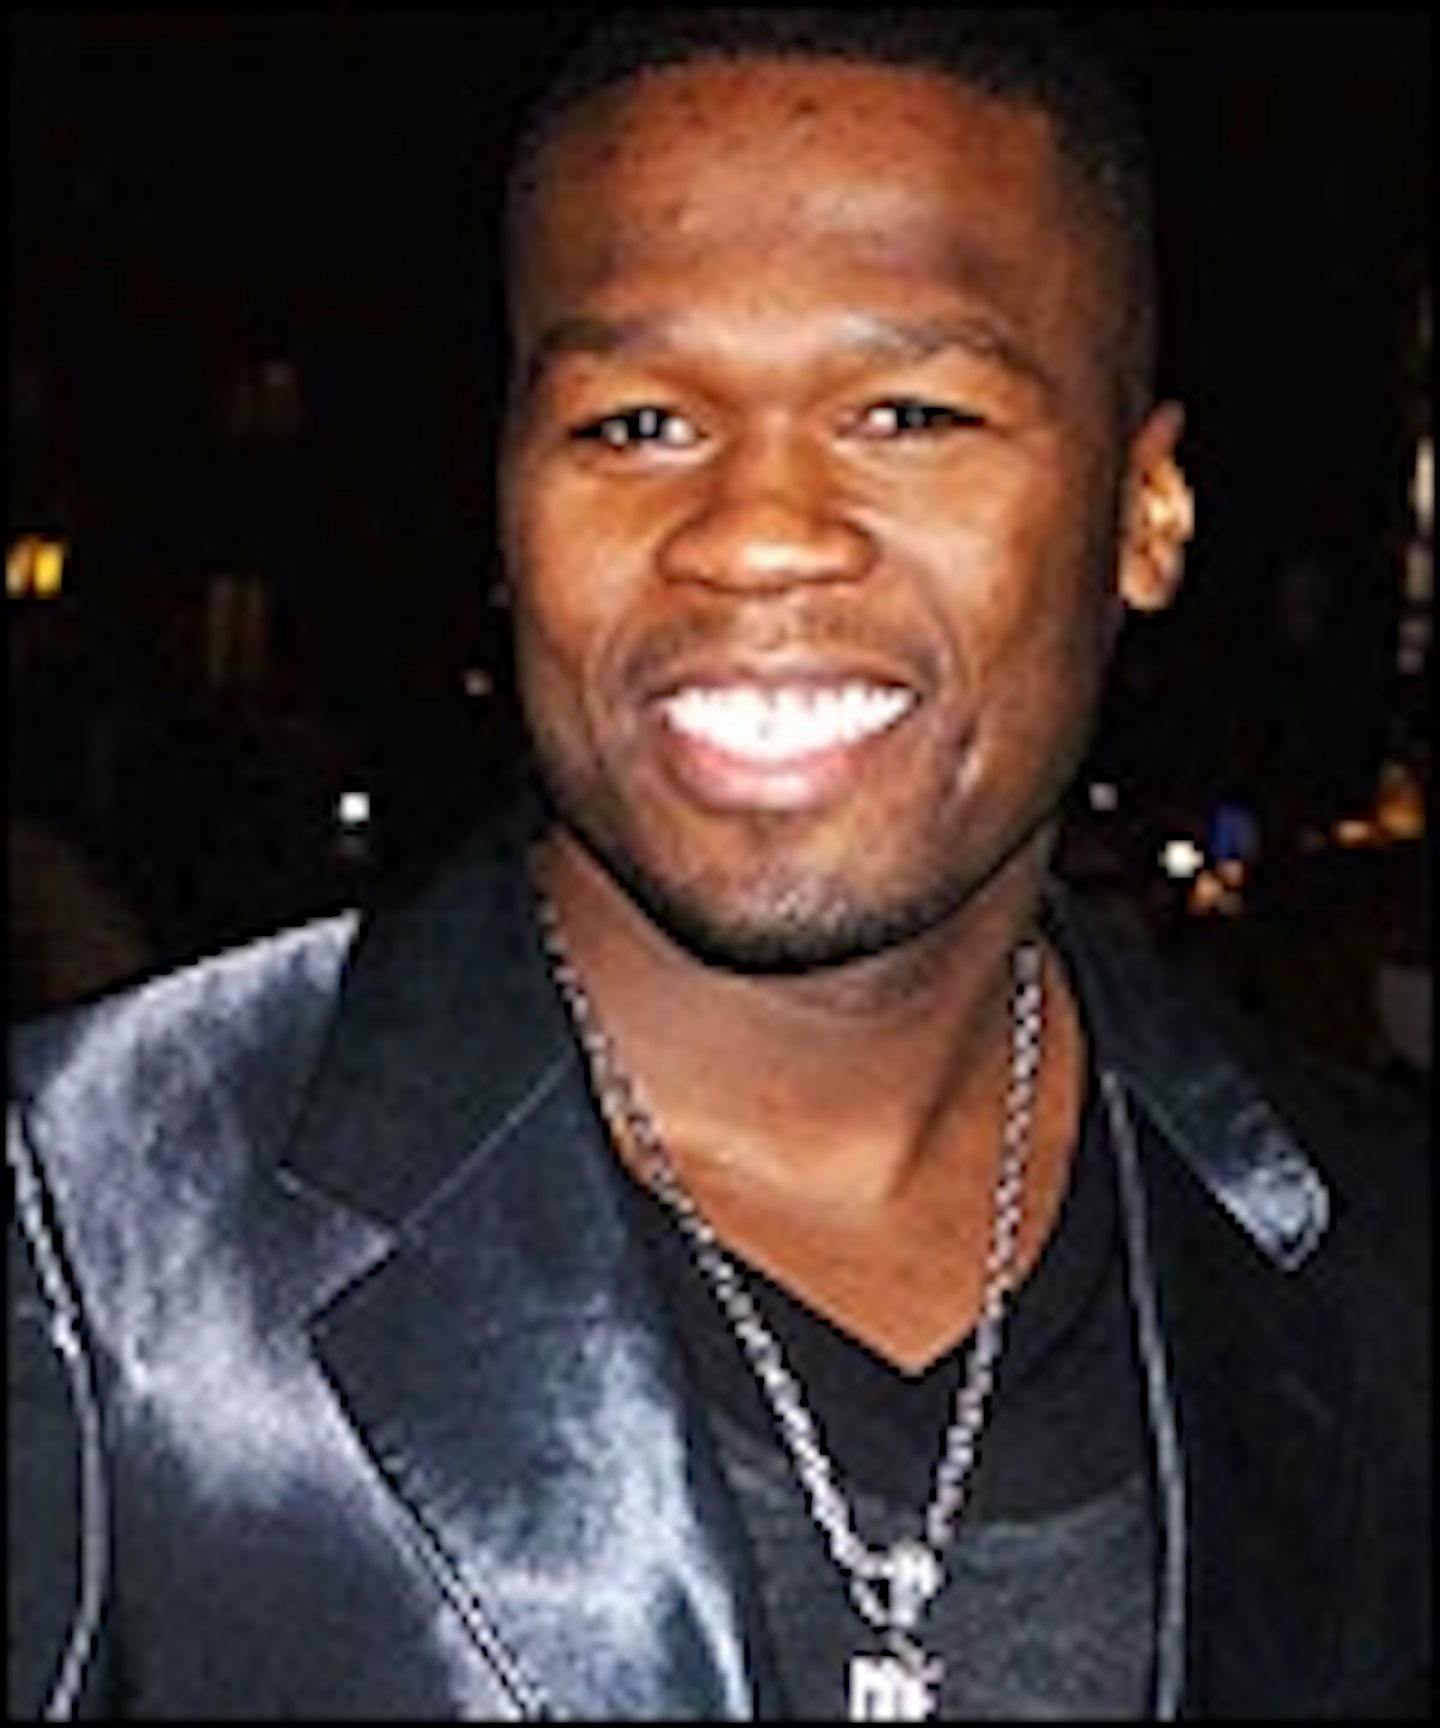 50 Cent Knows Things Fall Apart